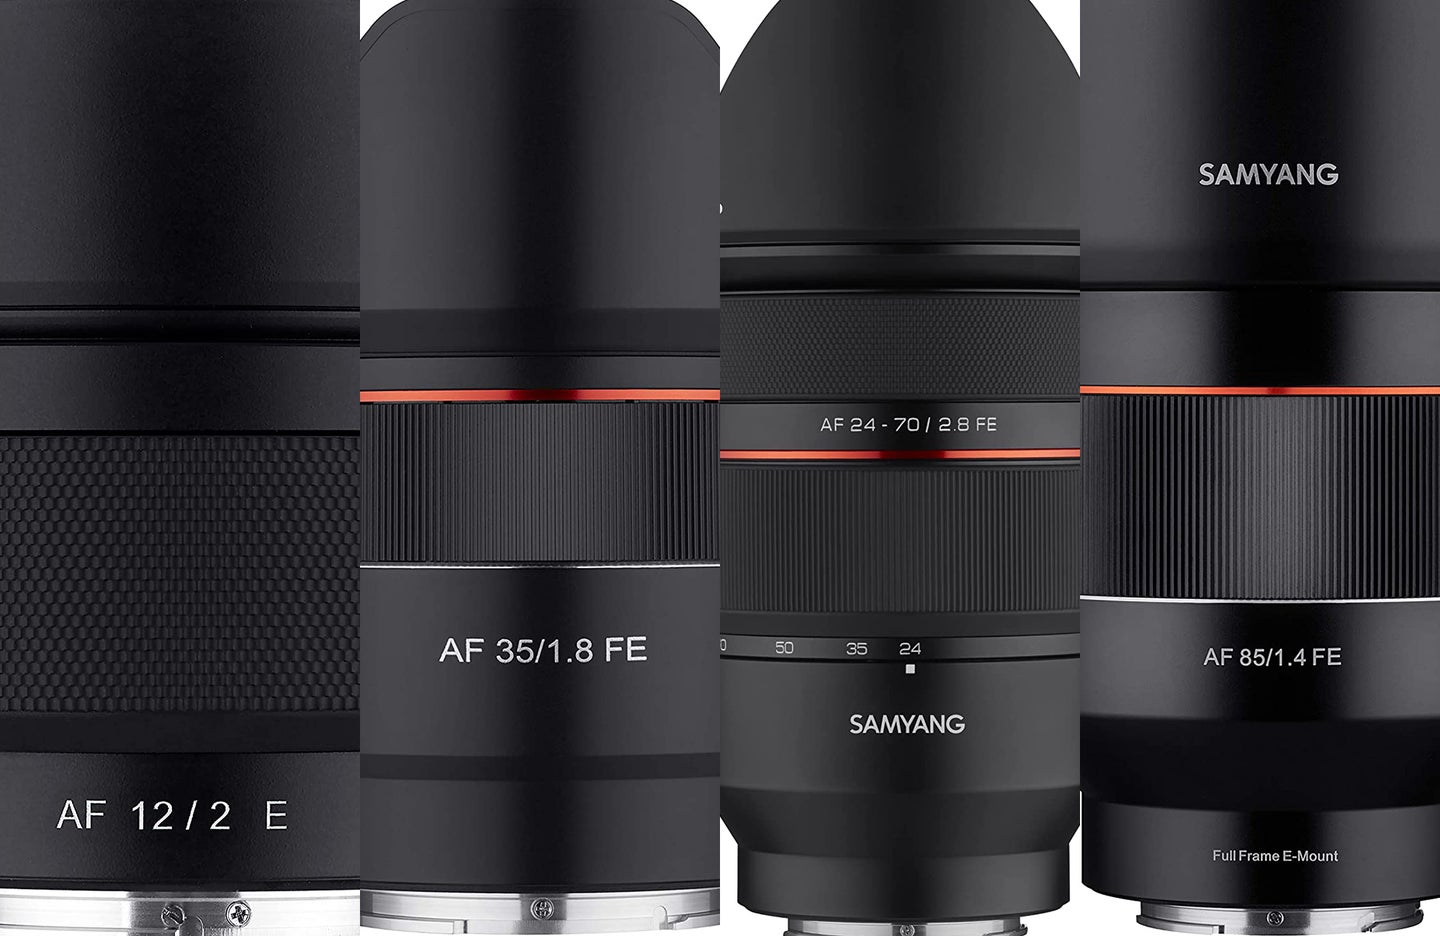 Samyang lenses for SonyE mount are on sale during the Amazon Prime Early Access sale.